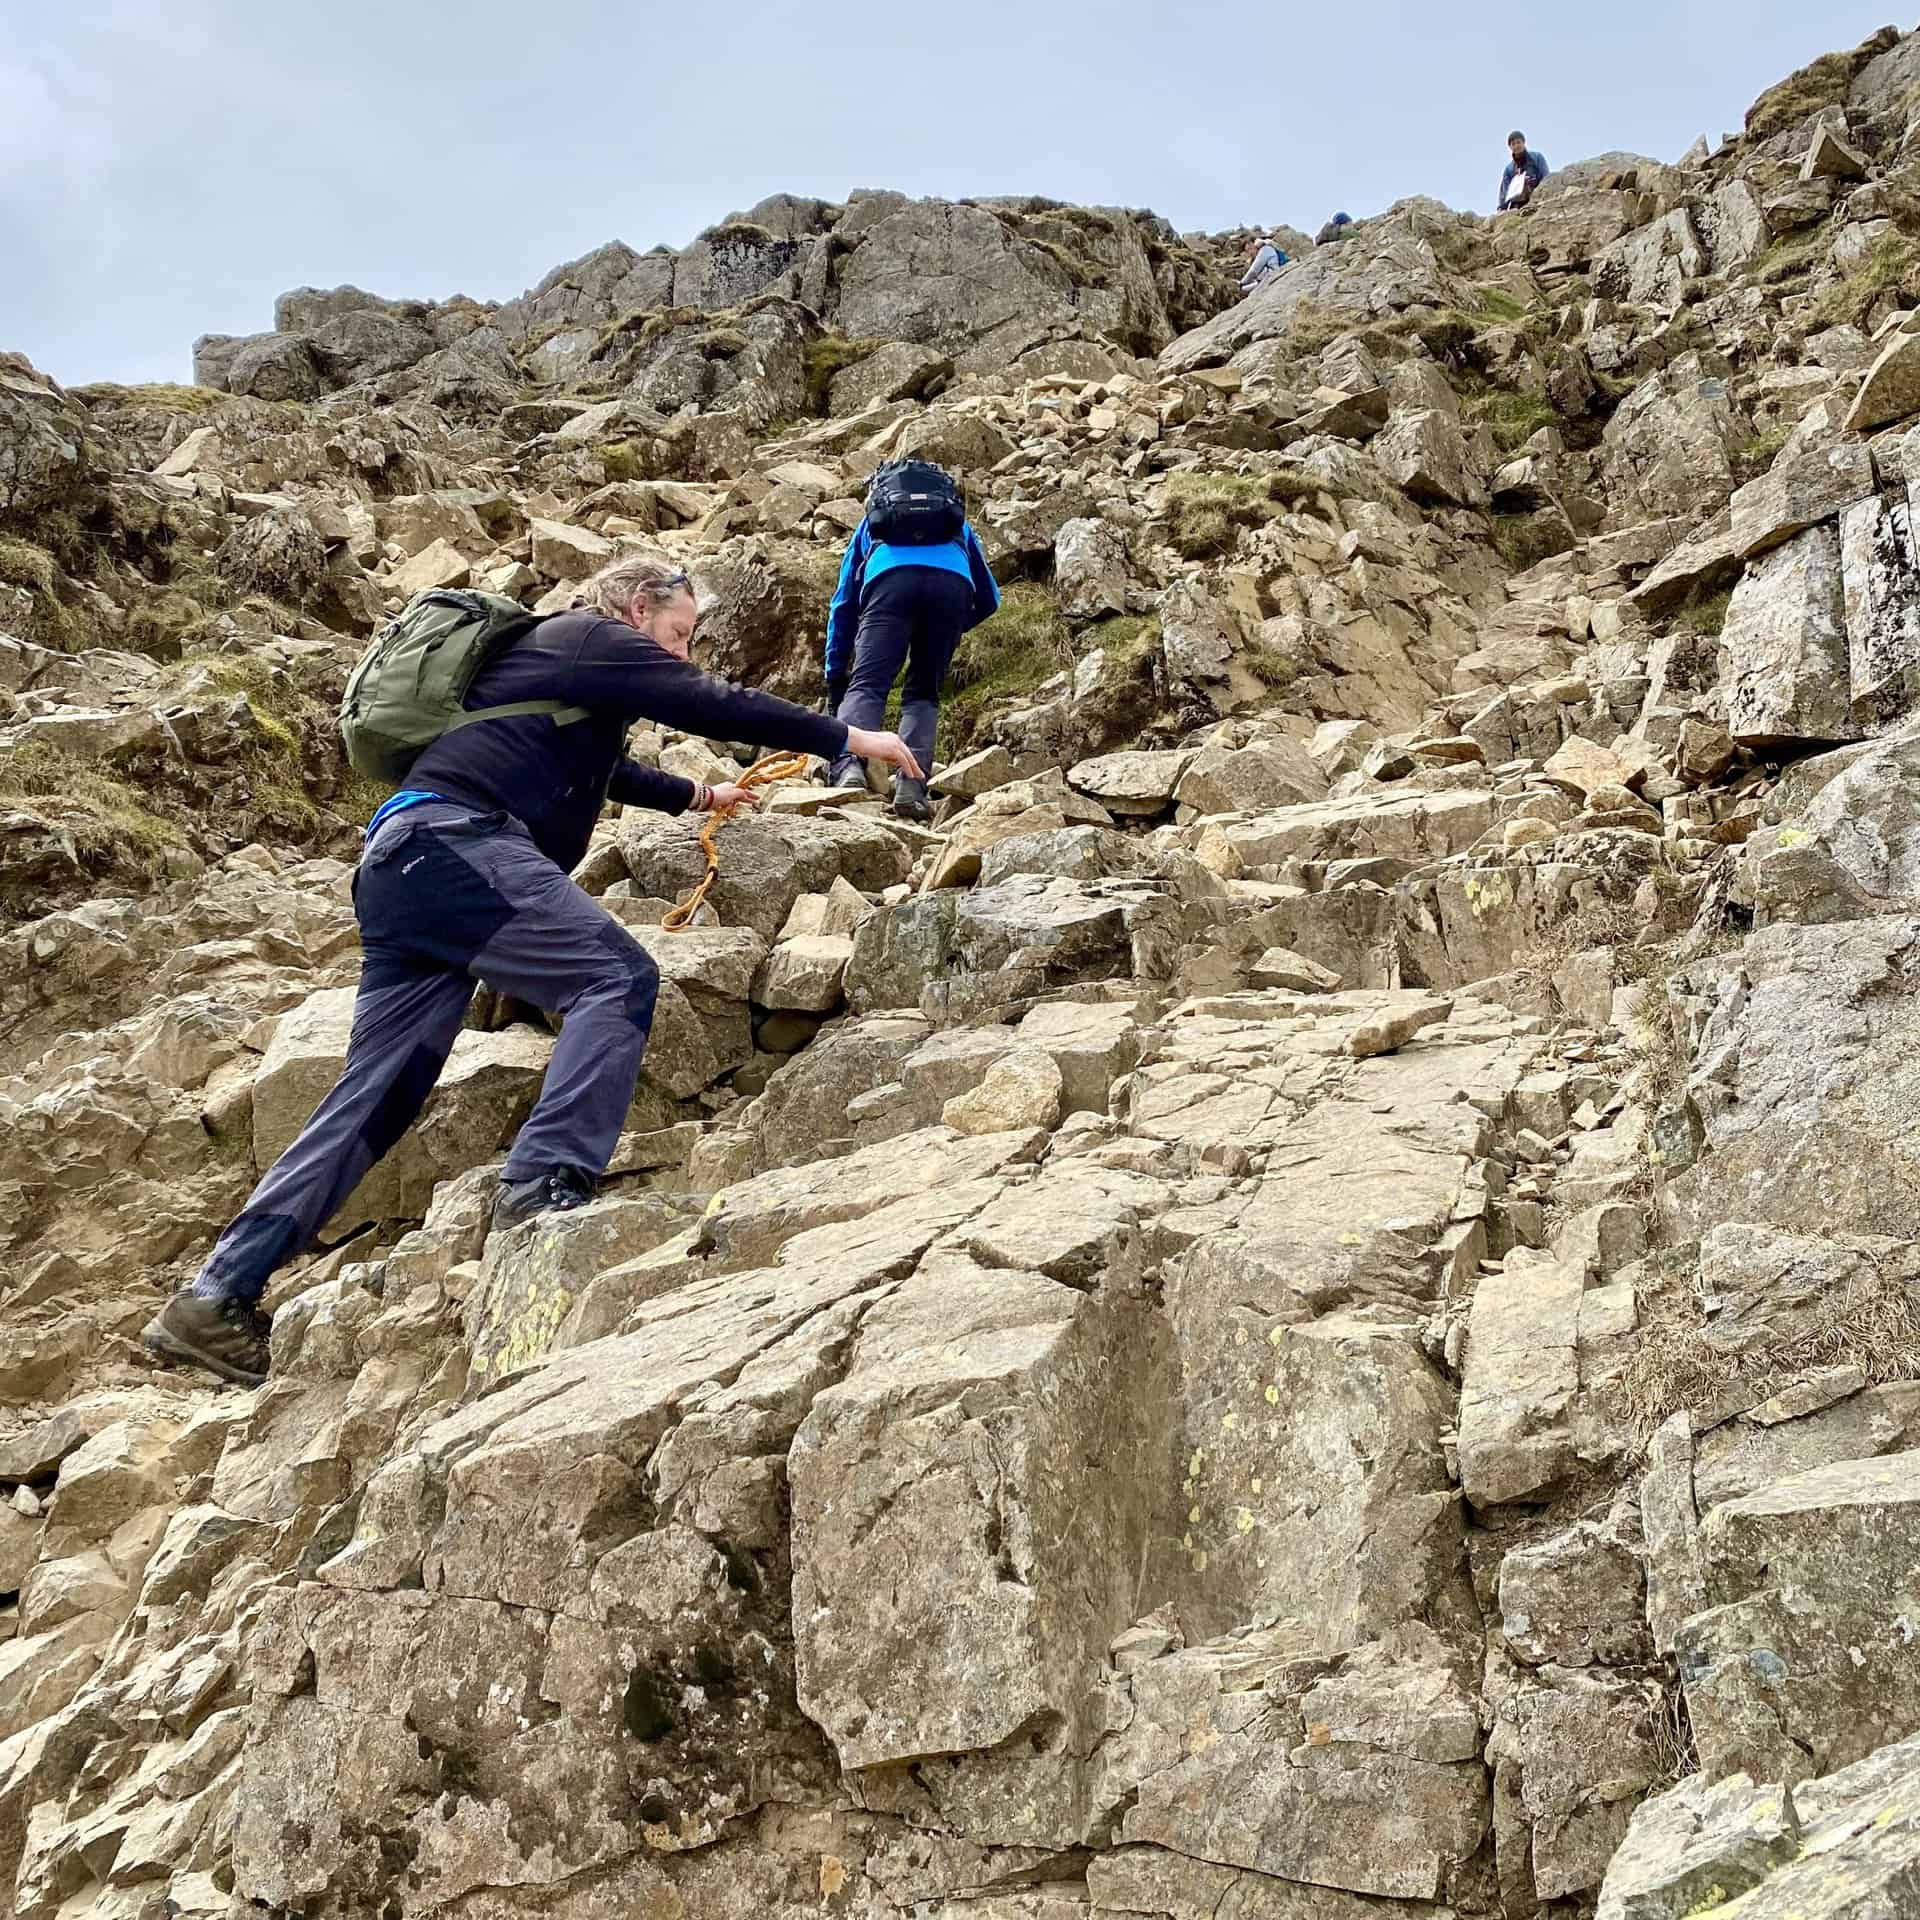 The climb to the top of Great Gable.